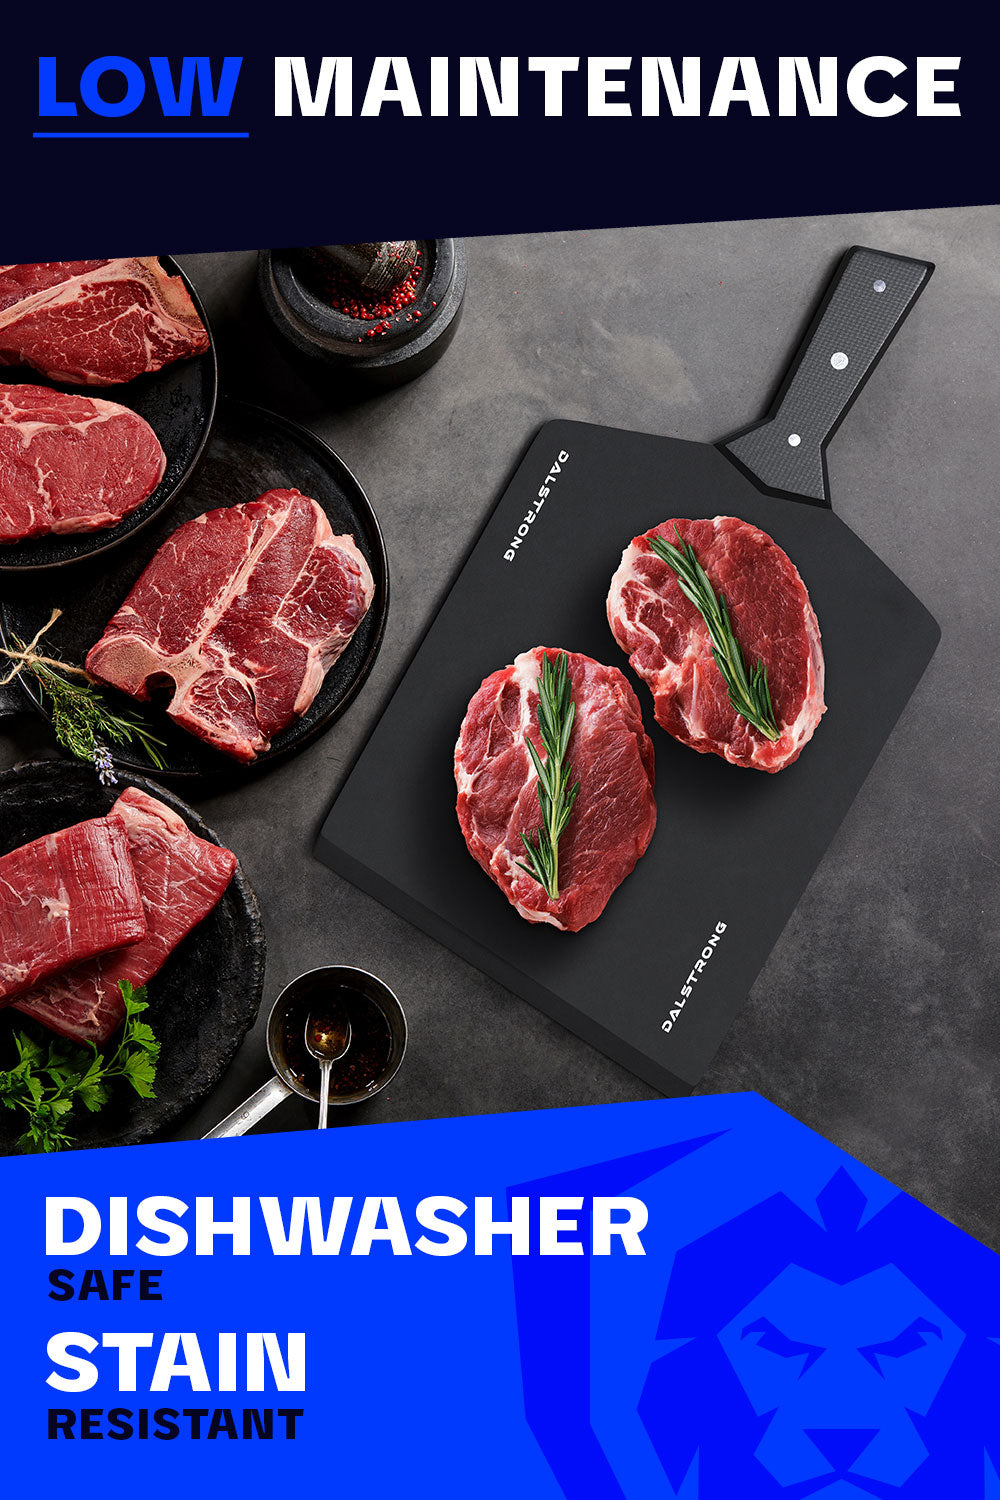 Dalstrong infinity series fibre cutting board featuring it's easy to clean board design.